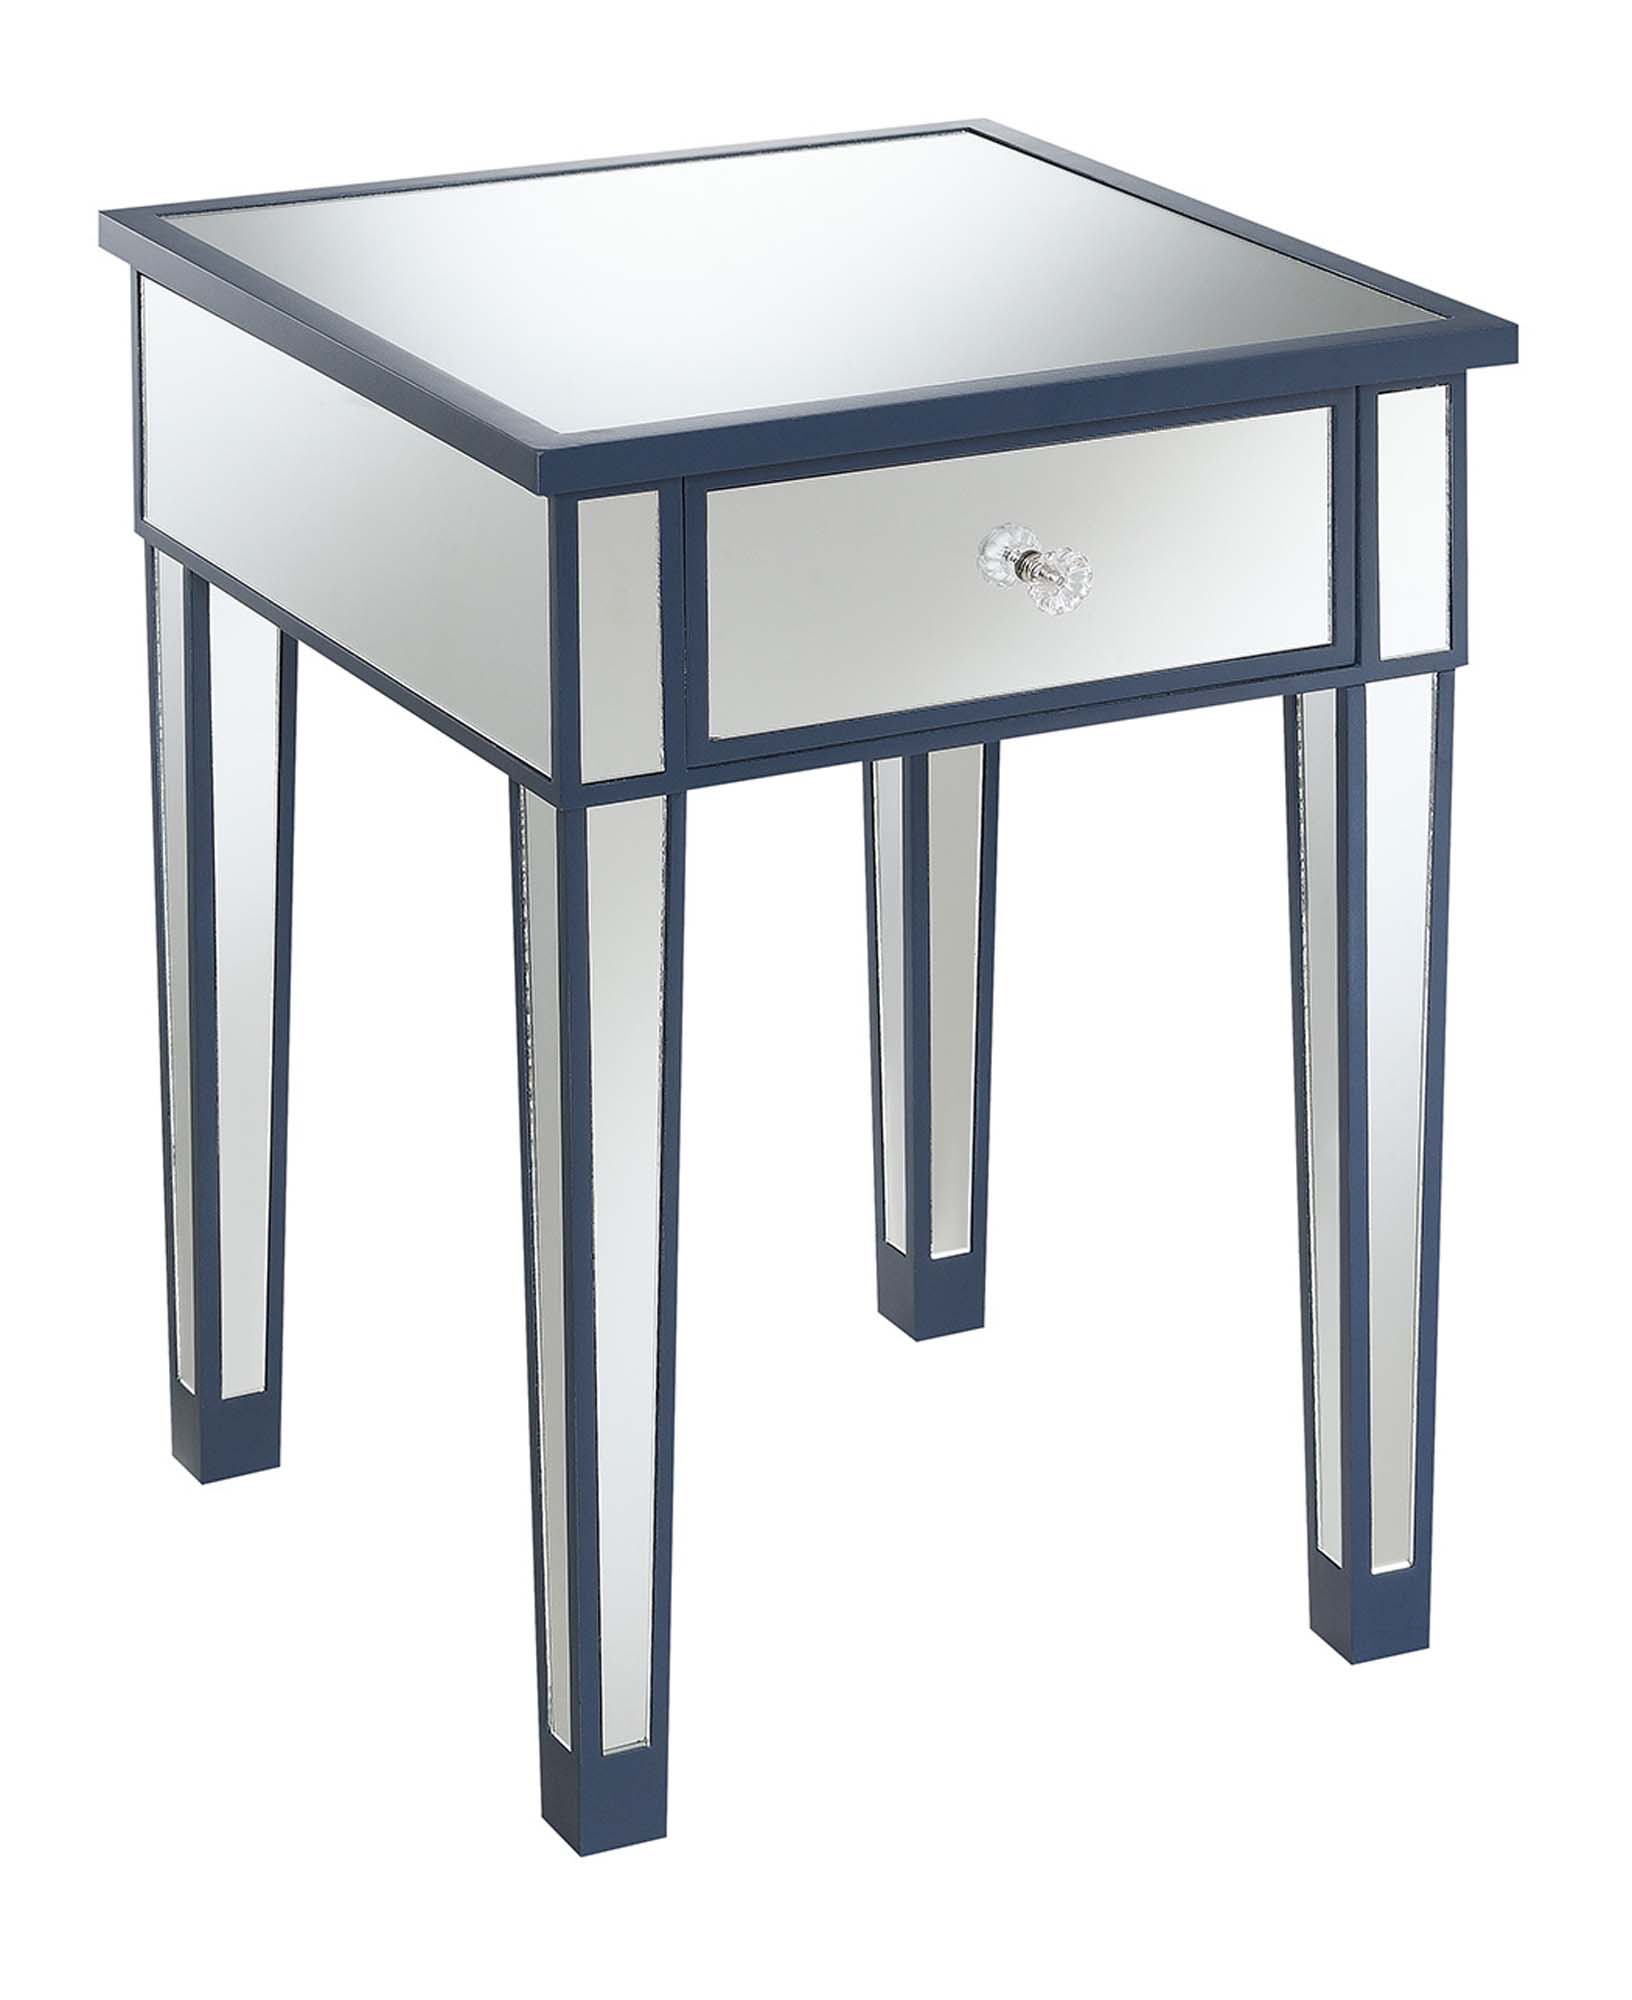 Convenience Concepts Gold Coast Mirrored End Table with Drawer, Multiple Colors - image 3 of 3